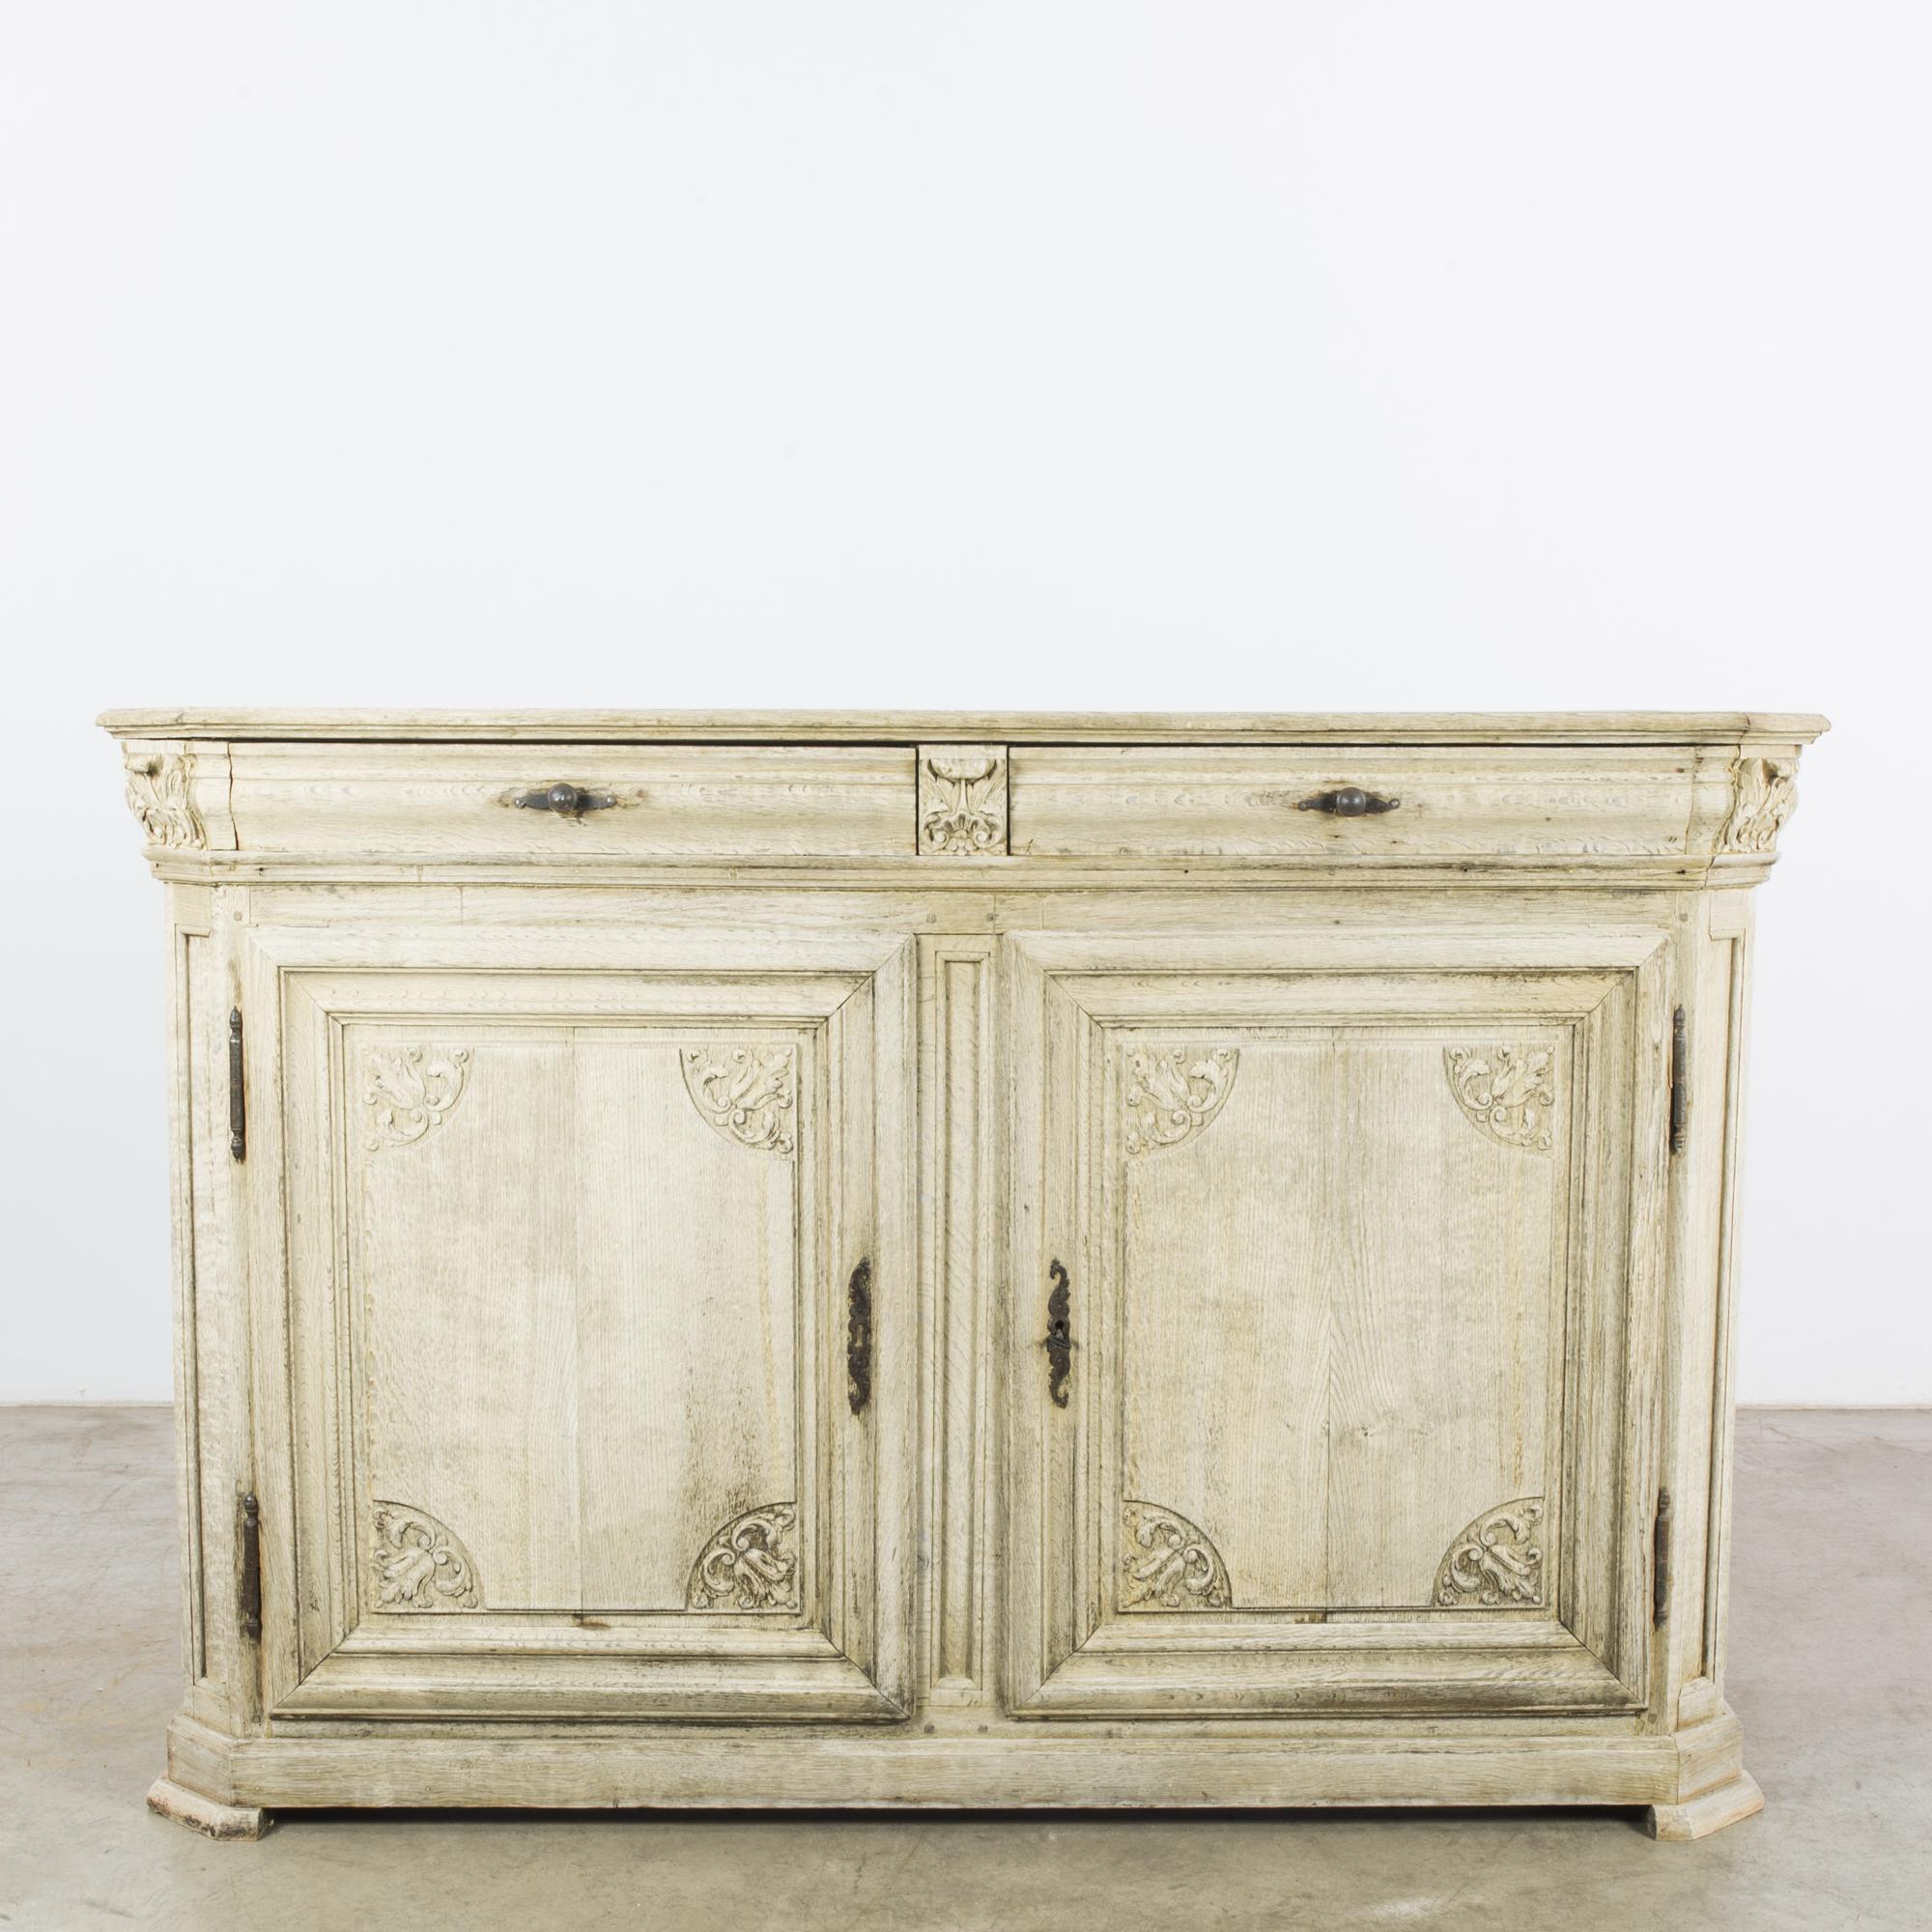 An oak buffet from Belgium, circa 1800. Exquisitely detailed carving adds a baroque touch to the contoured cabinet. Little flowers peek from between leafy flourishes and shell-like crests. Original lock pieces and drawer handles echo sinuous lines.